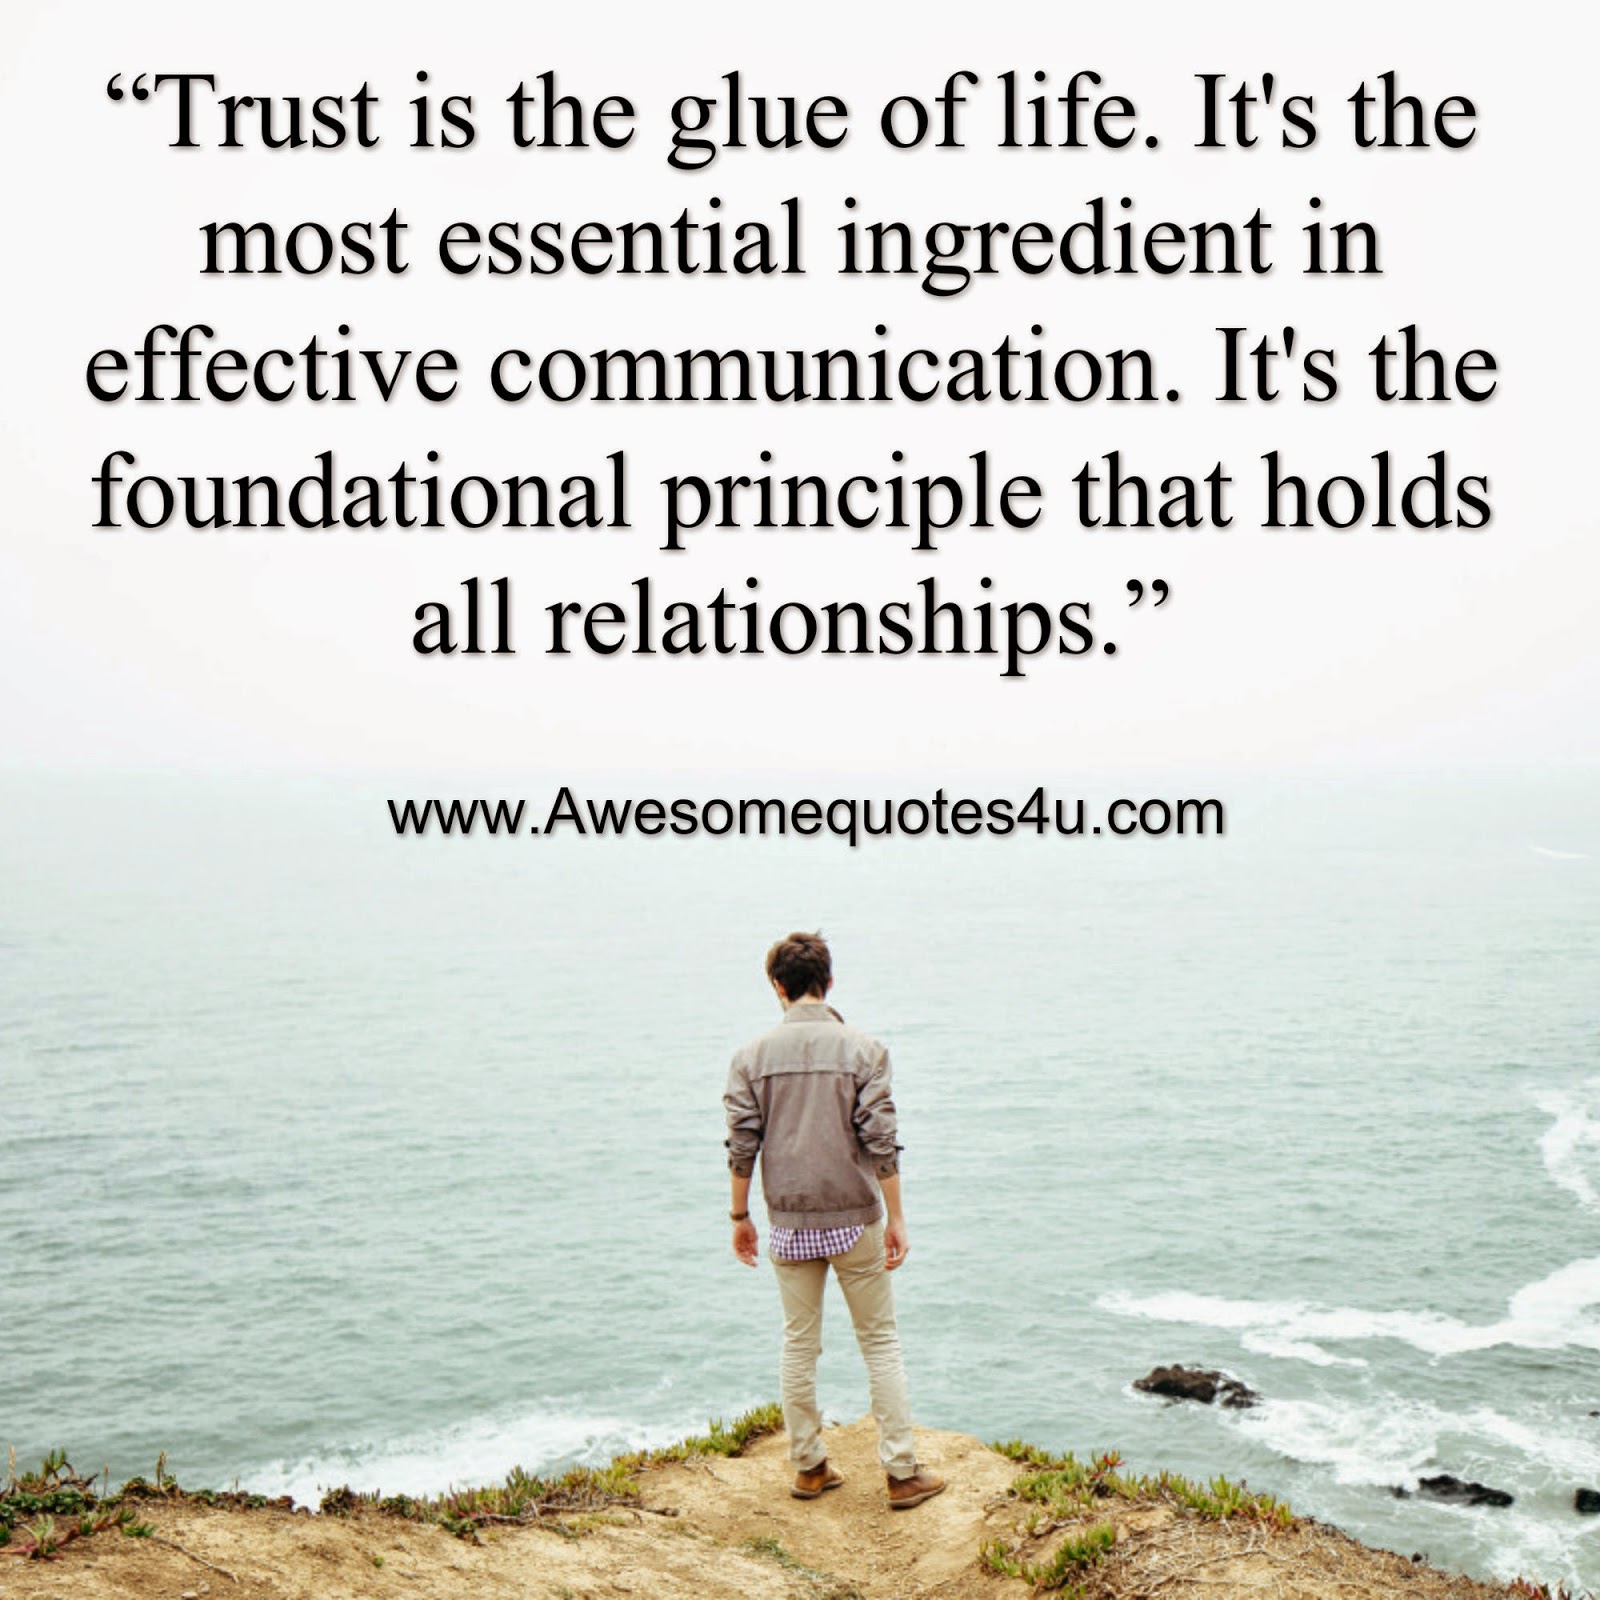 “Trust is the glue of life It s the most essential ingre nt in effective munication It s the foundational principle that holds all relationships